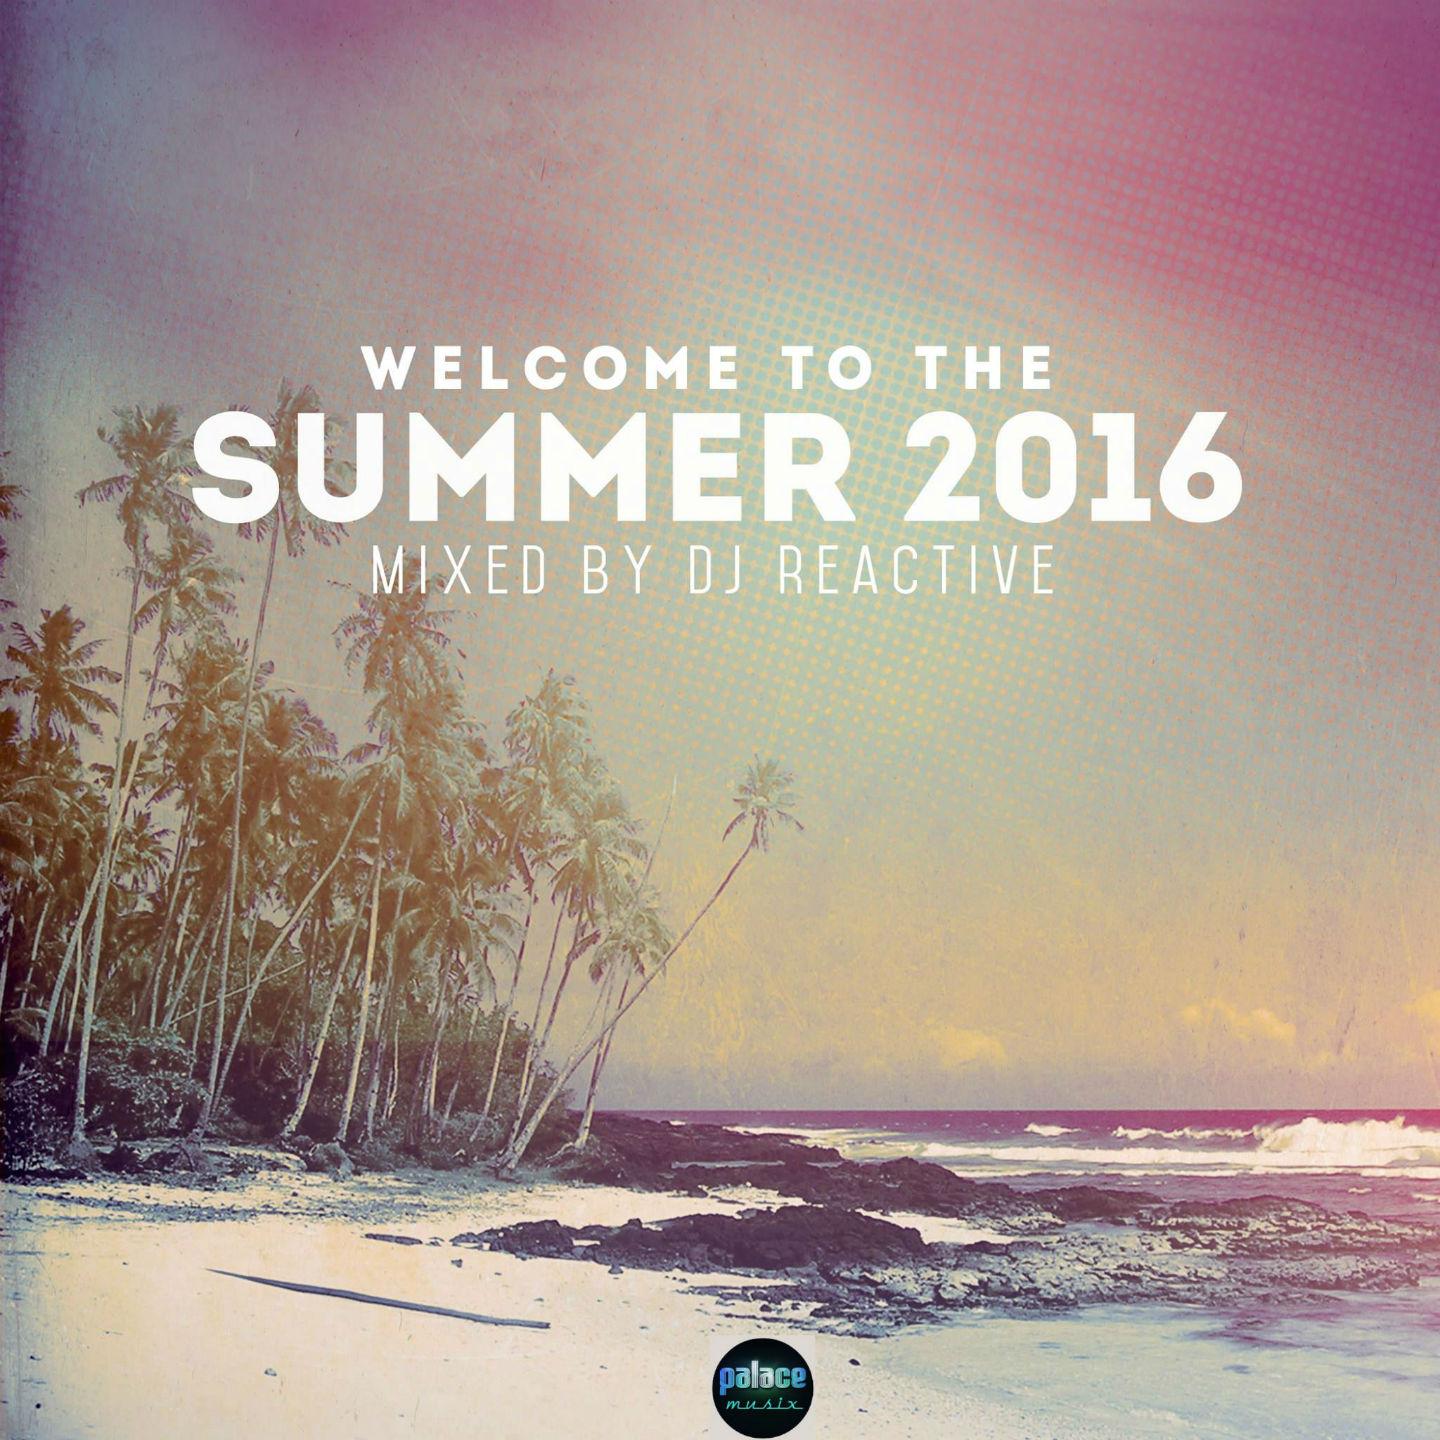 Welcome to Summer 2016 by DJ REACTIVE